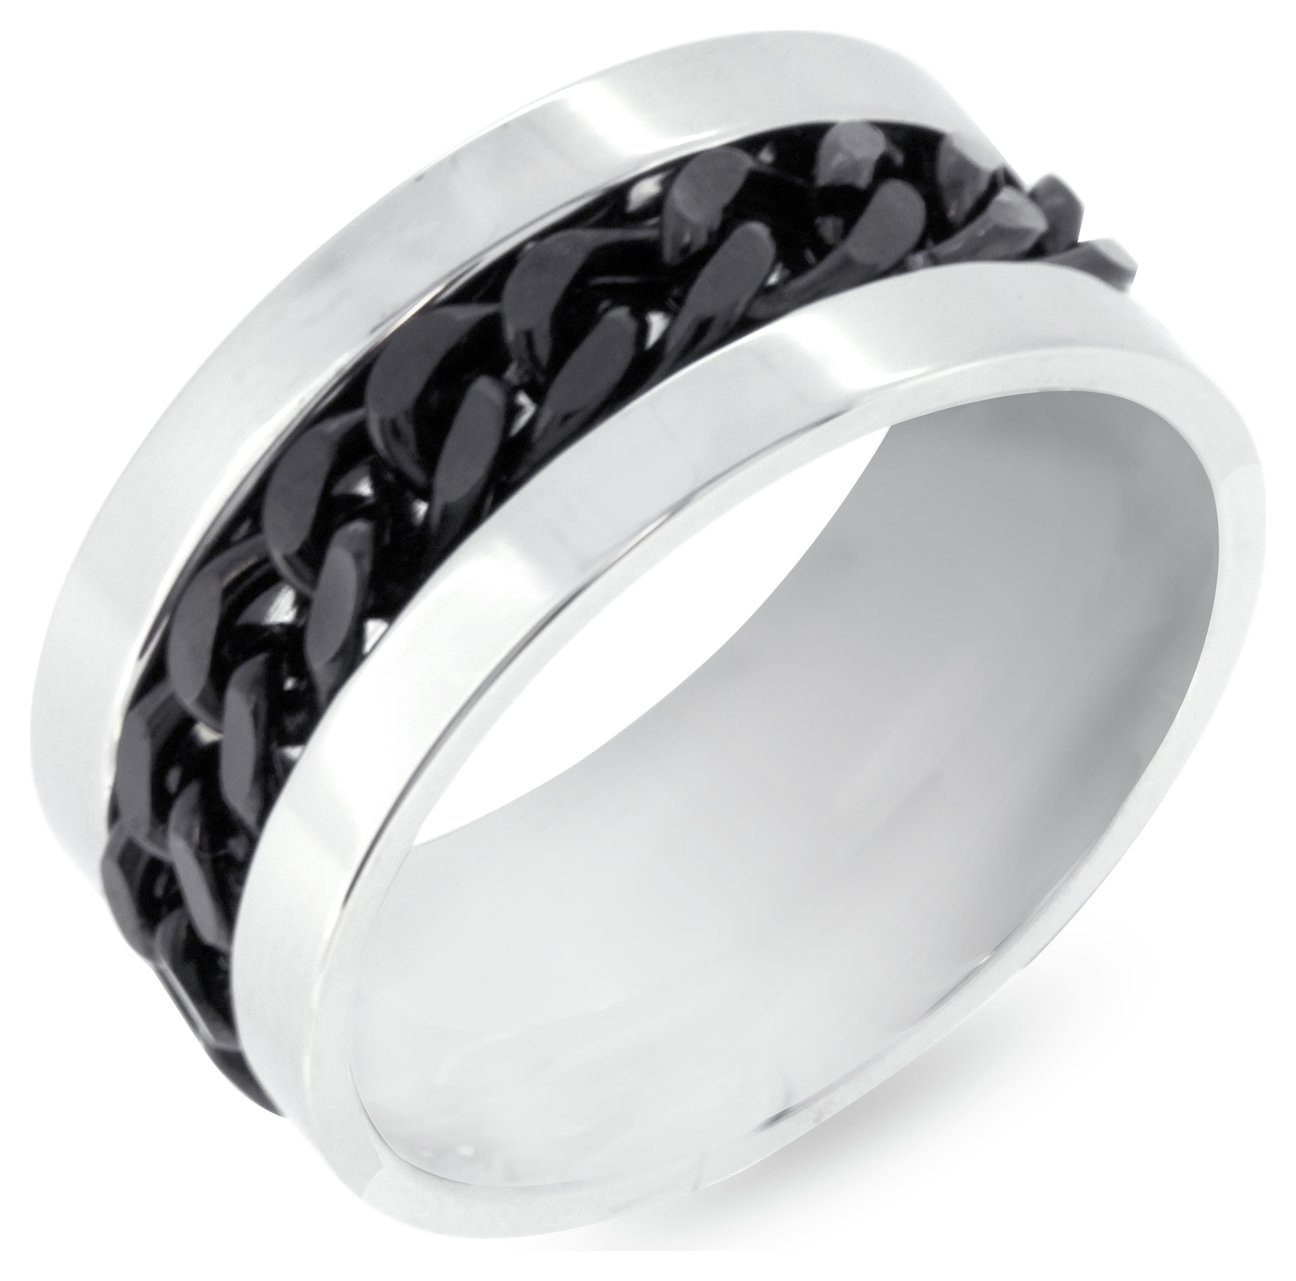 Domain Gents' Stainless Steel Black Chain Ring Boxed. Review